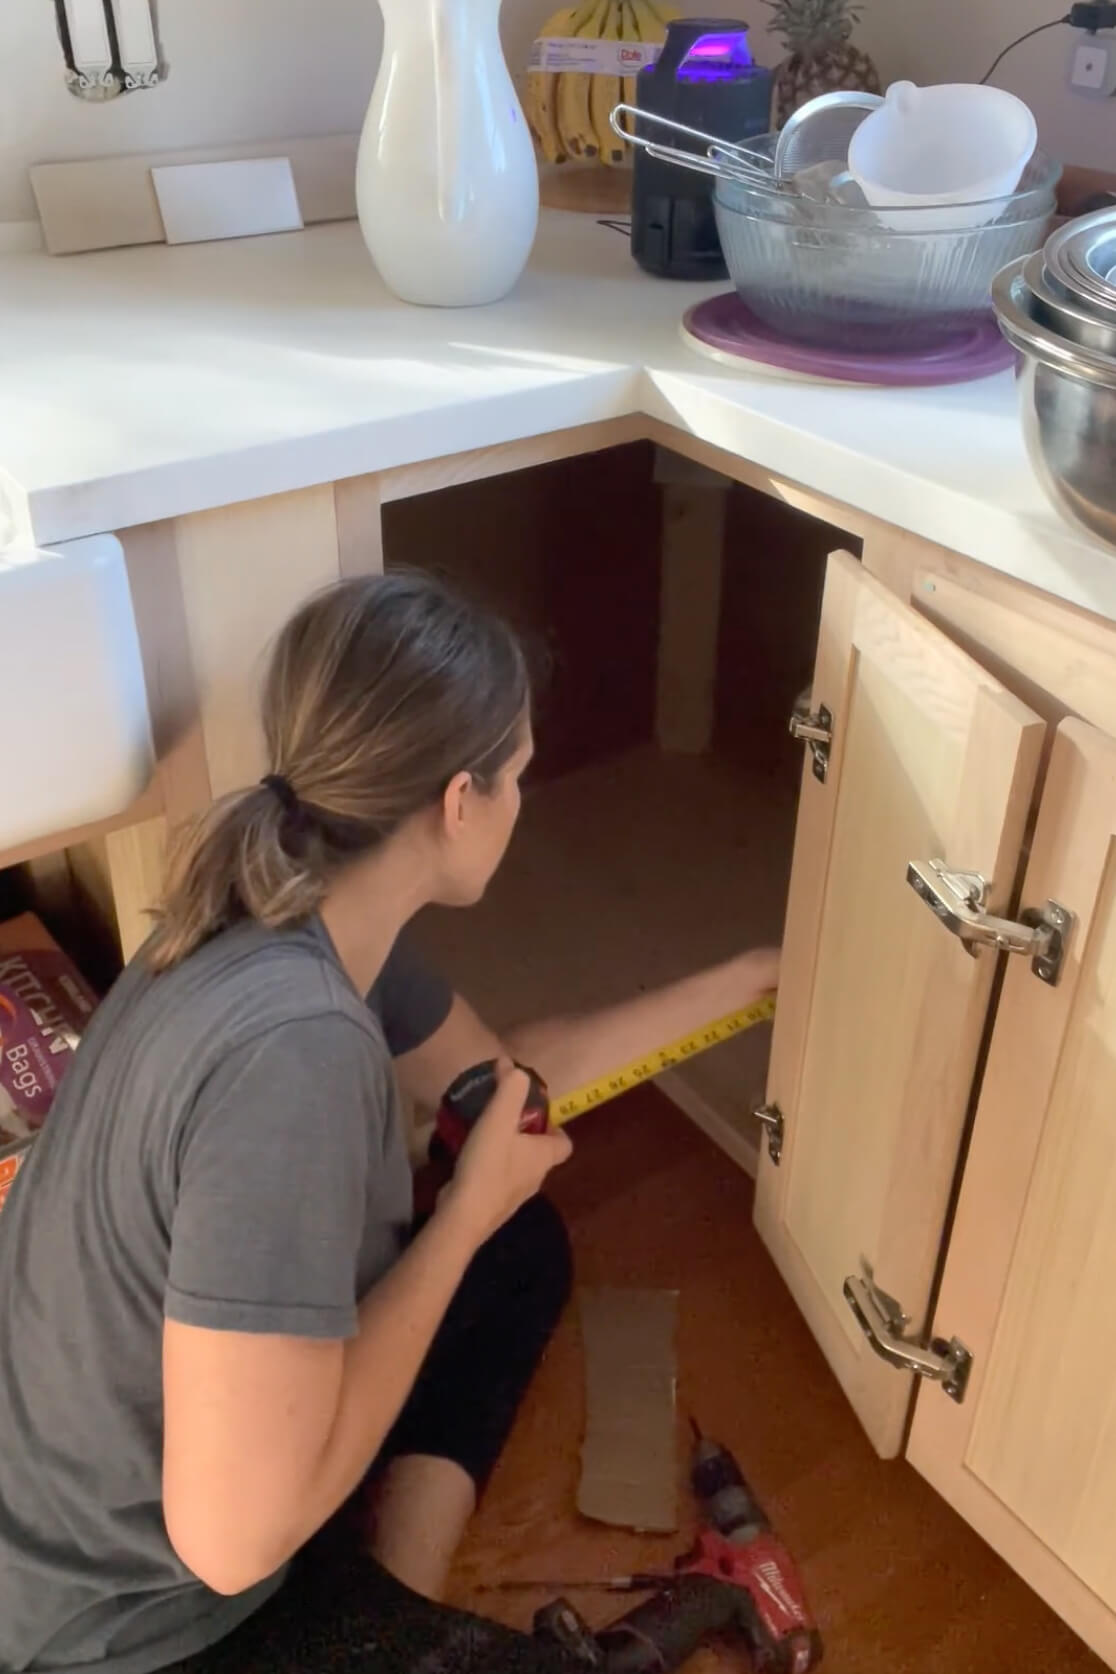 Measuring while adding shelves to a kitchen cabinet.